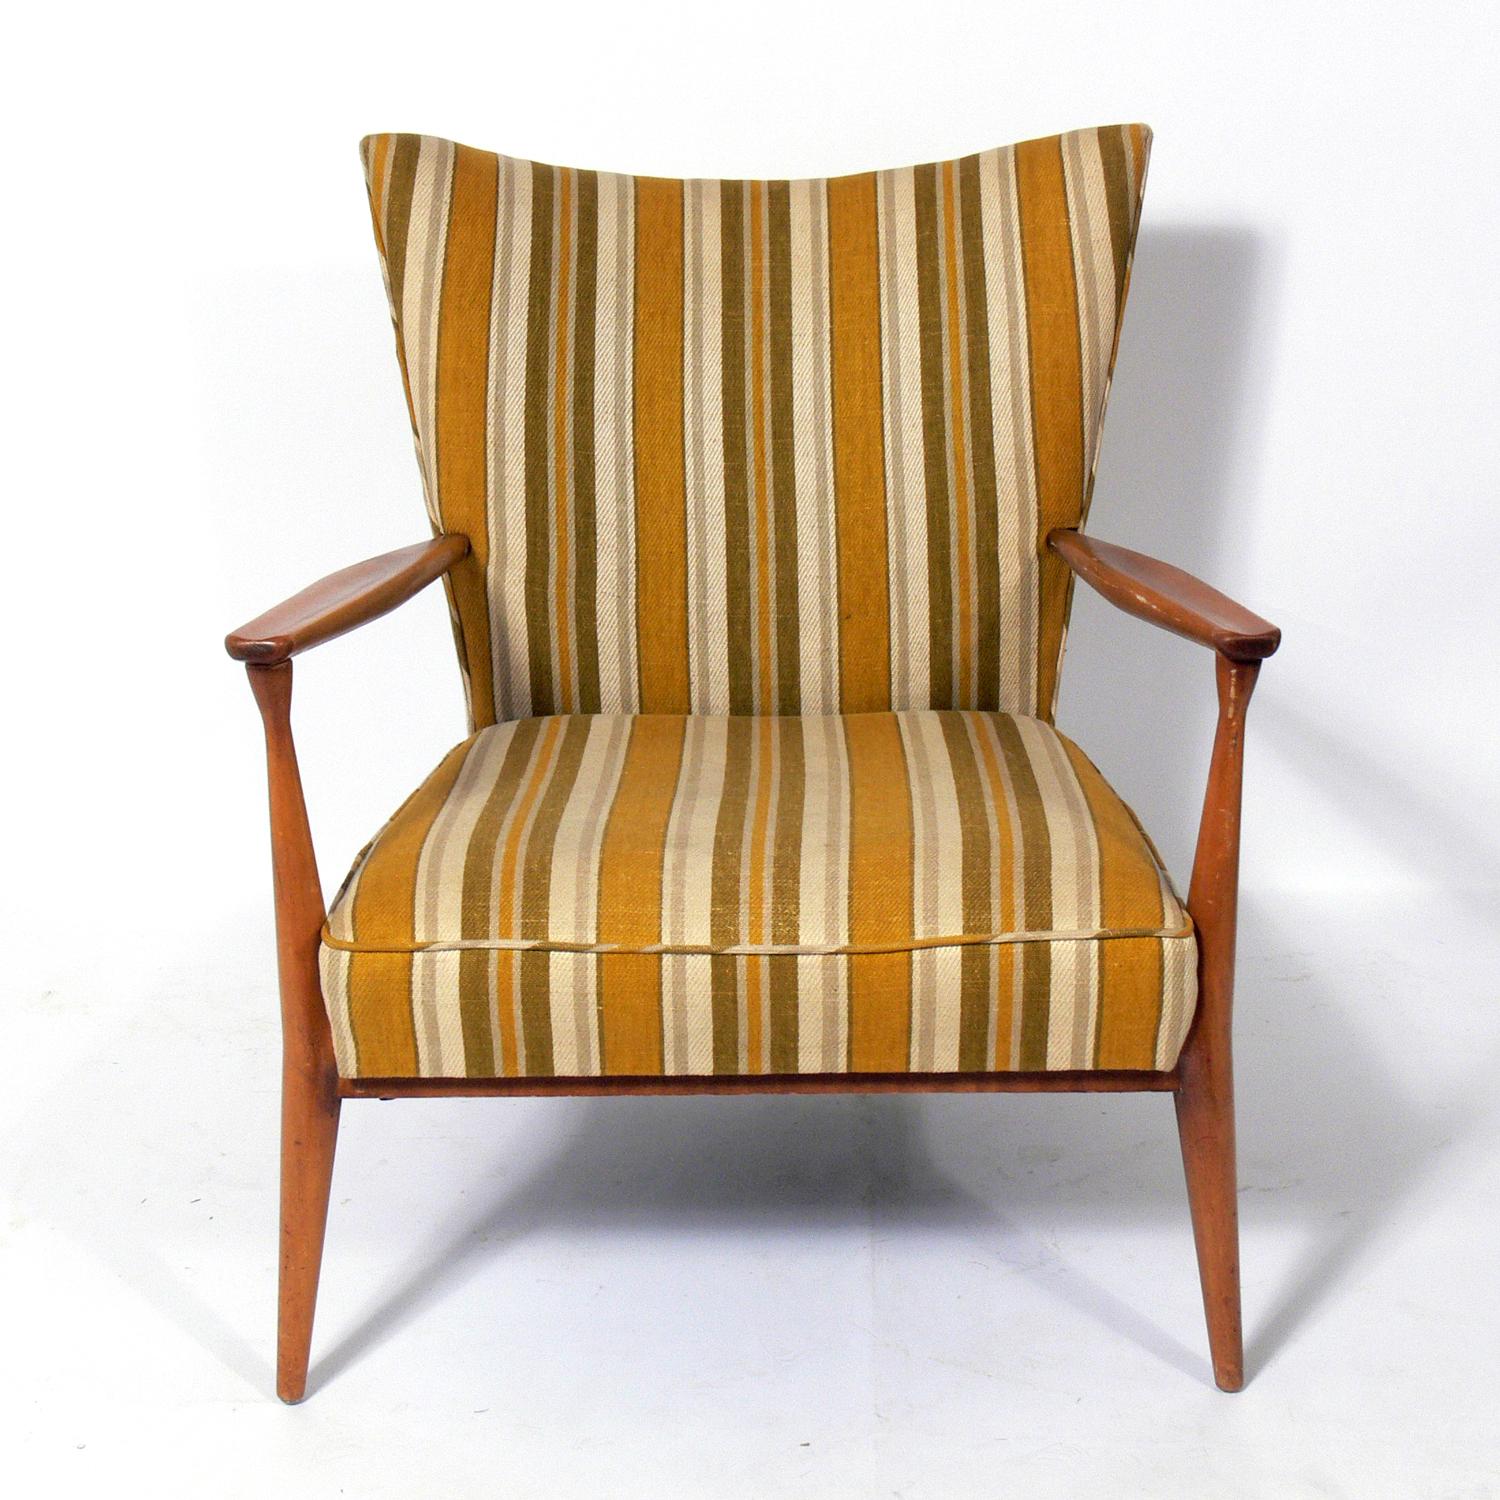 Curvaceous Mid-Century Modern lounge chair, designed by Paul McCobb, circa 1950s. This chair has wonderful lines at every turn and looks great from any angle. Very comfortable. This piece is currently being reupholstered and refinished and can be